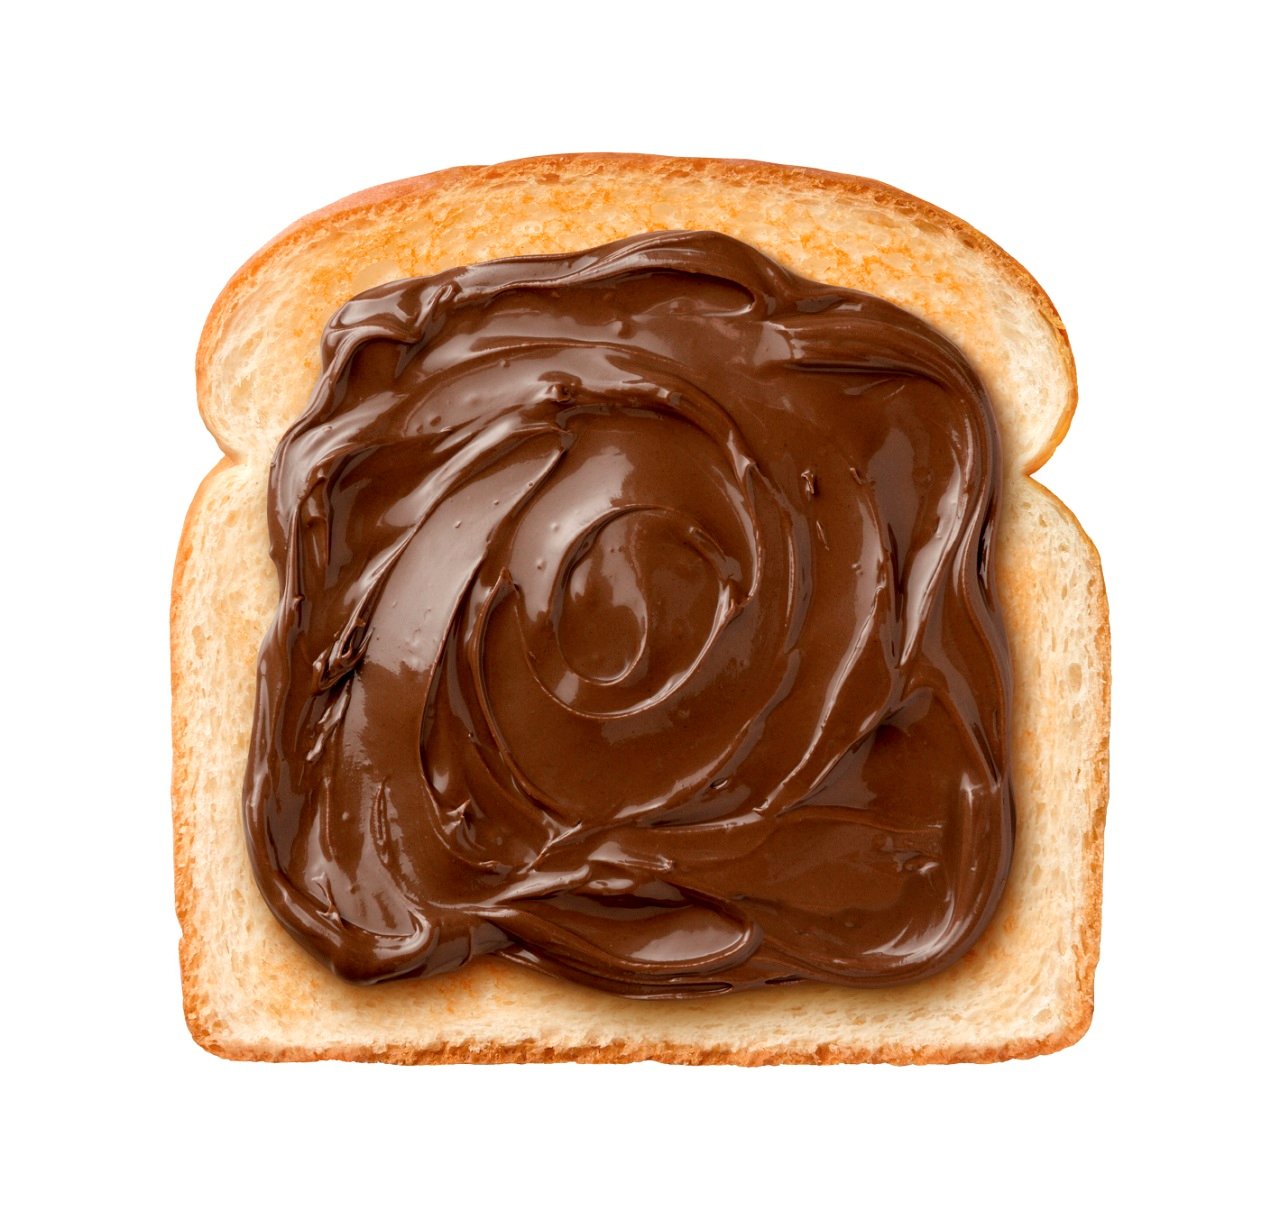 chocolate, spread, toast, crust, swirl, breakfast, bread, brown, nutella, sweet, snack, food, tasty, slice, dessert, creamy, calories, hazelnut, sandwich, delicious, cocoa, nougat, nutrition, eat, isolated, isolated on white, closeup, object, nobody, white background, cut out, studio shot, single object, ingredient, portion, 